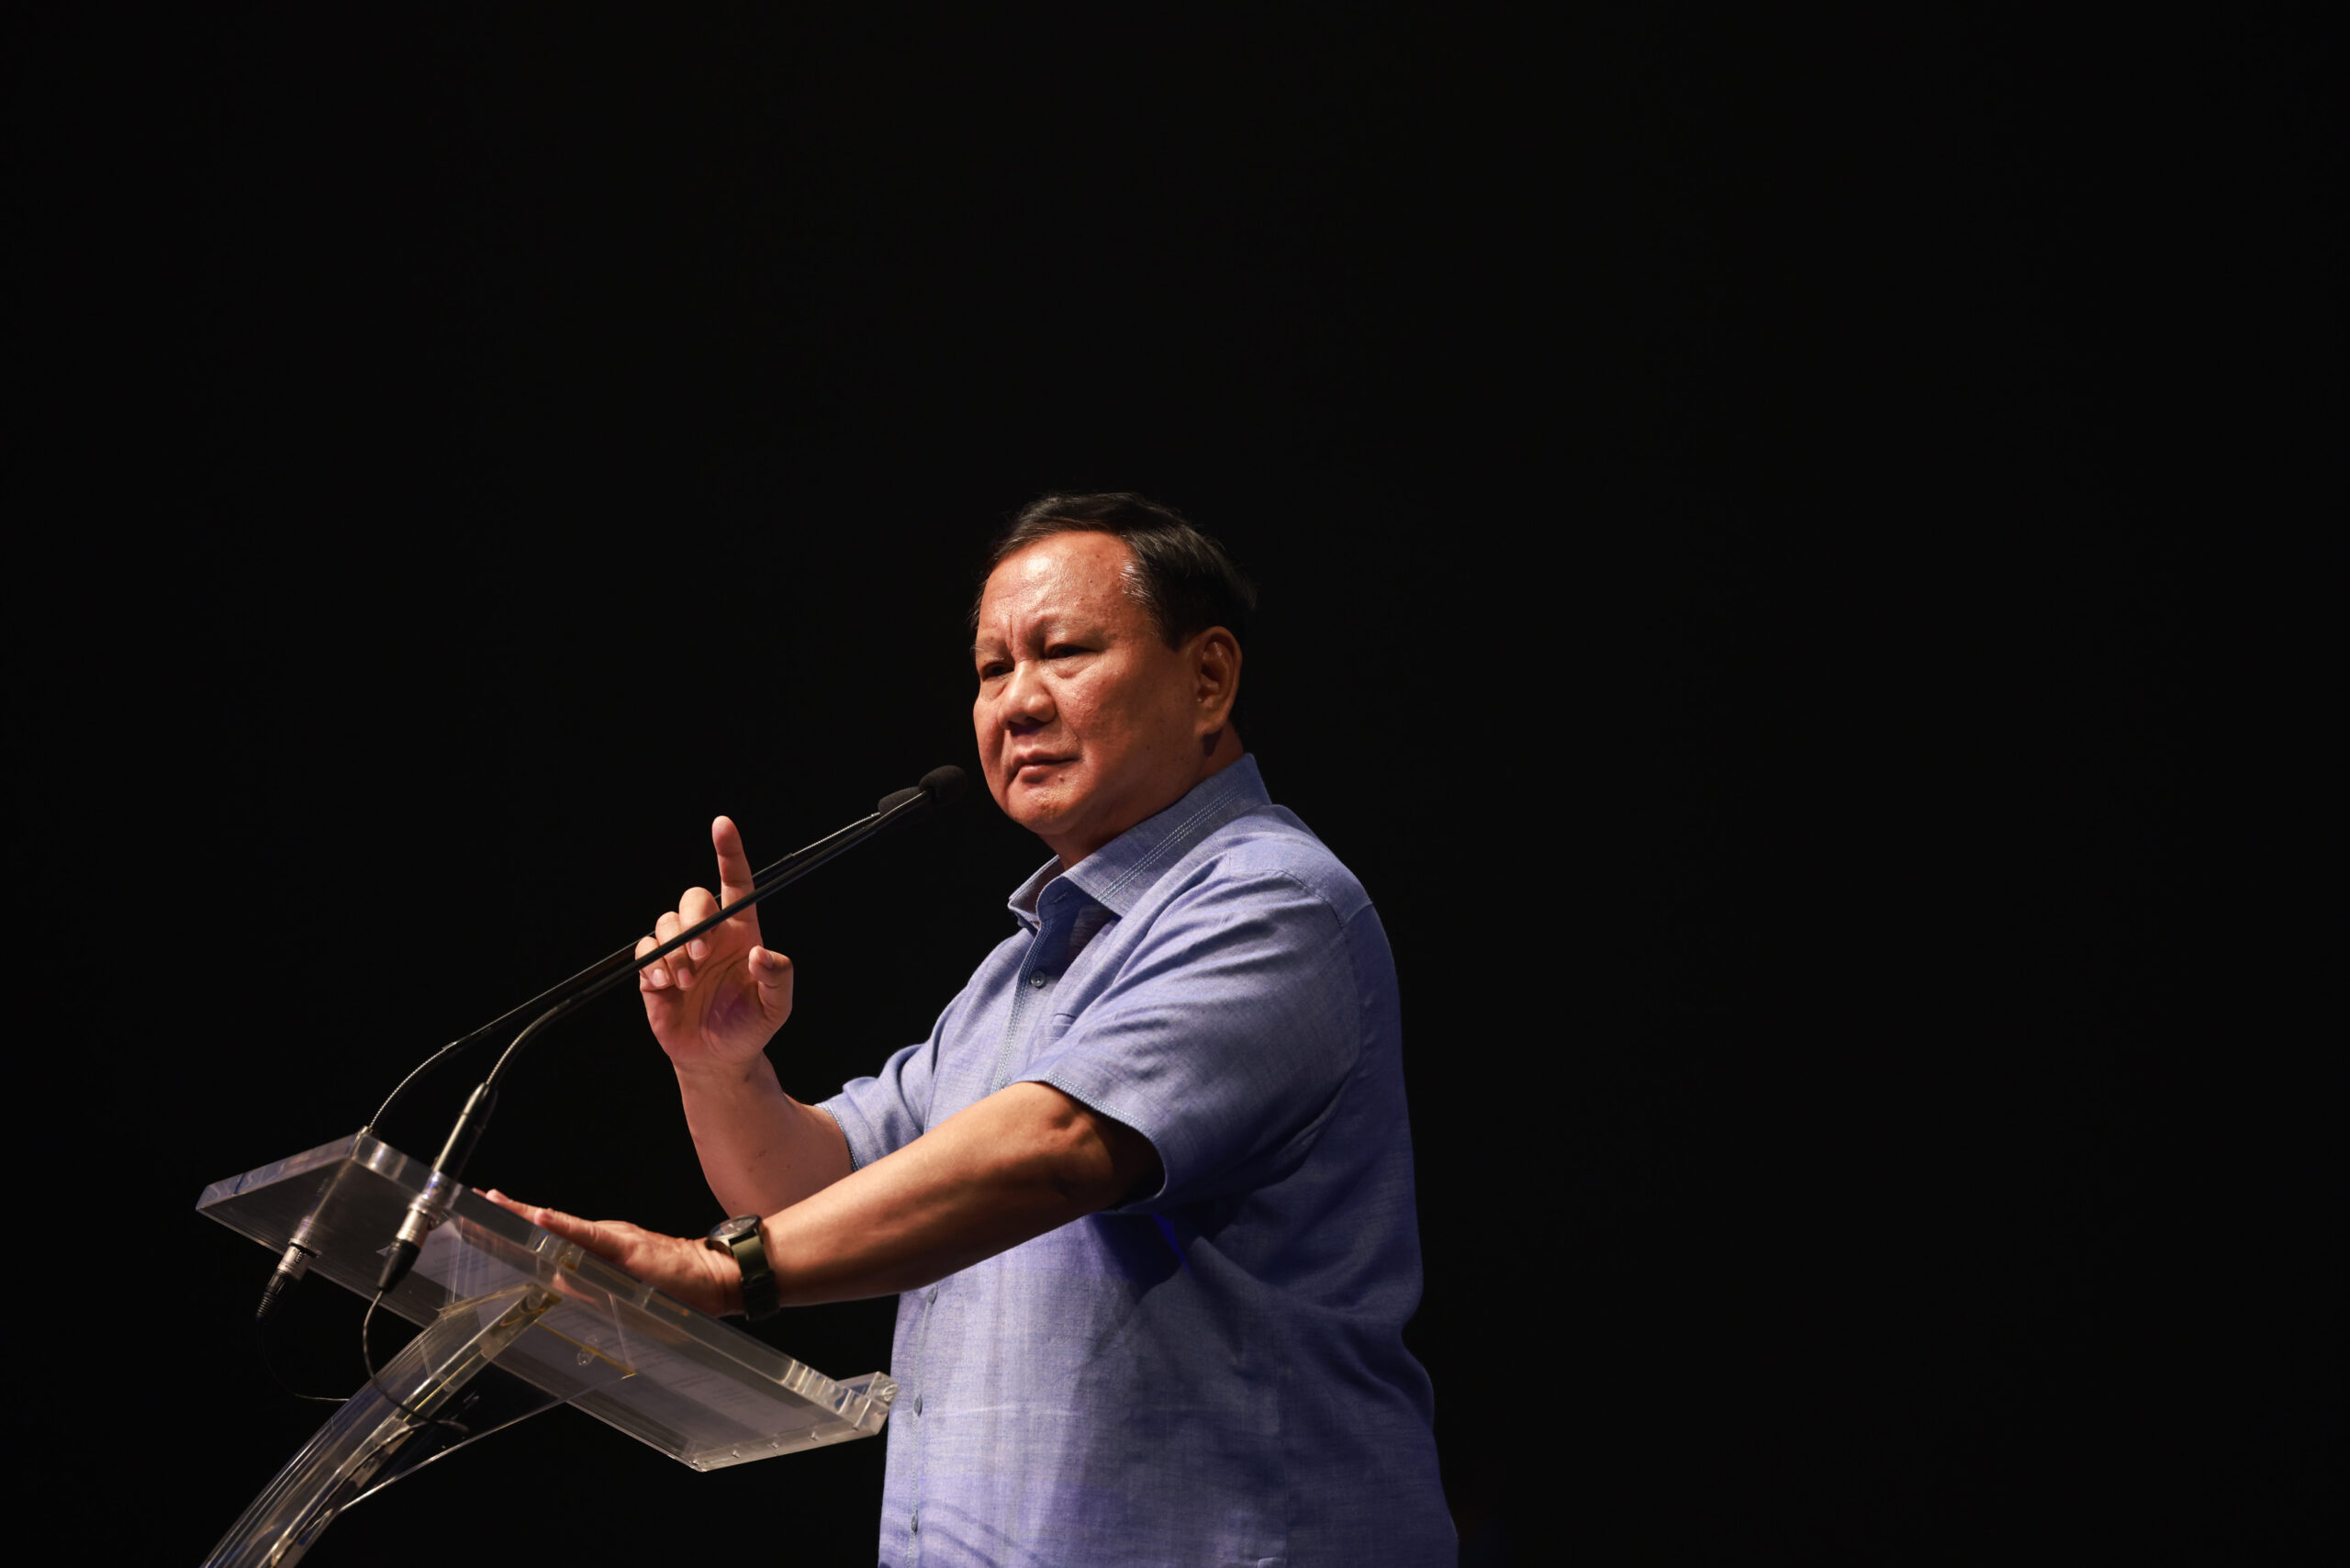 Prabowo Subianto: War in Gaza Must Stop, and an Independent Palestinian State Must be Established | palestine Prabowo